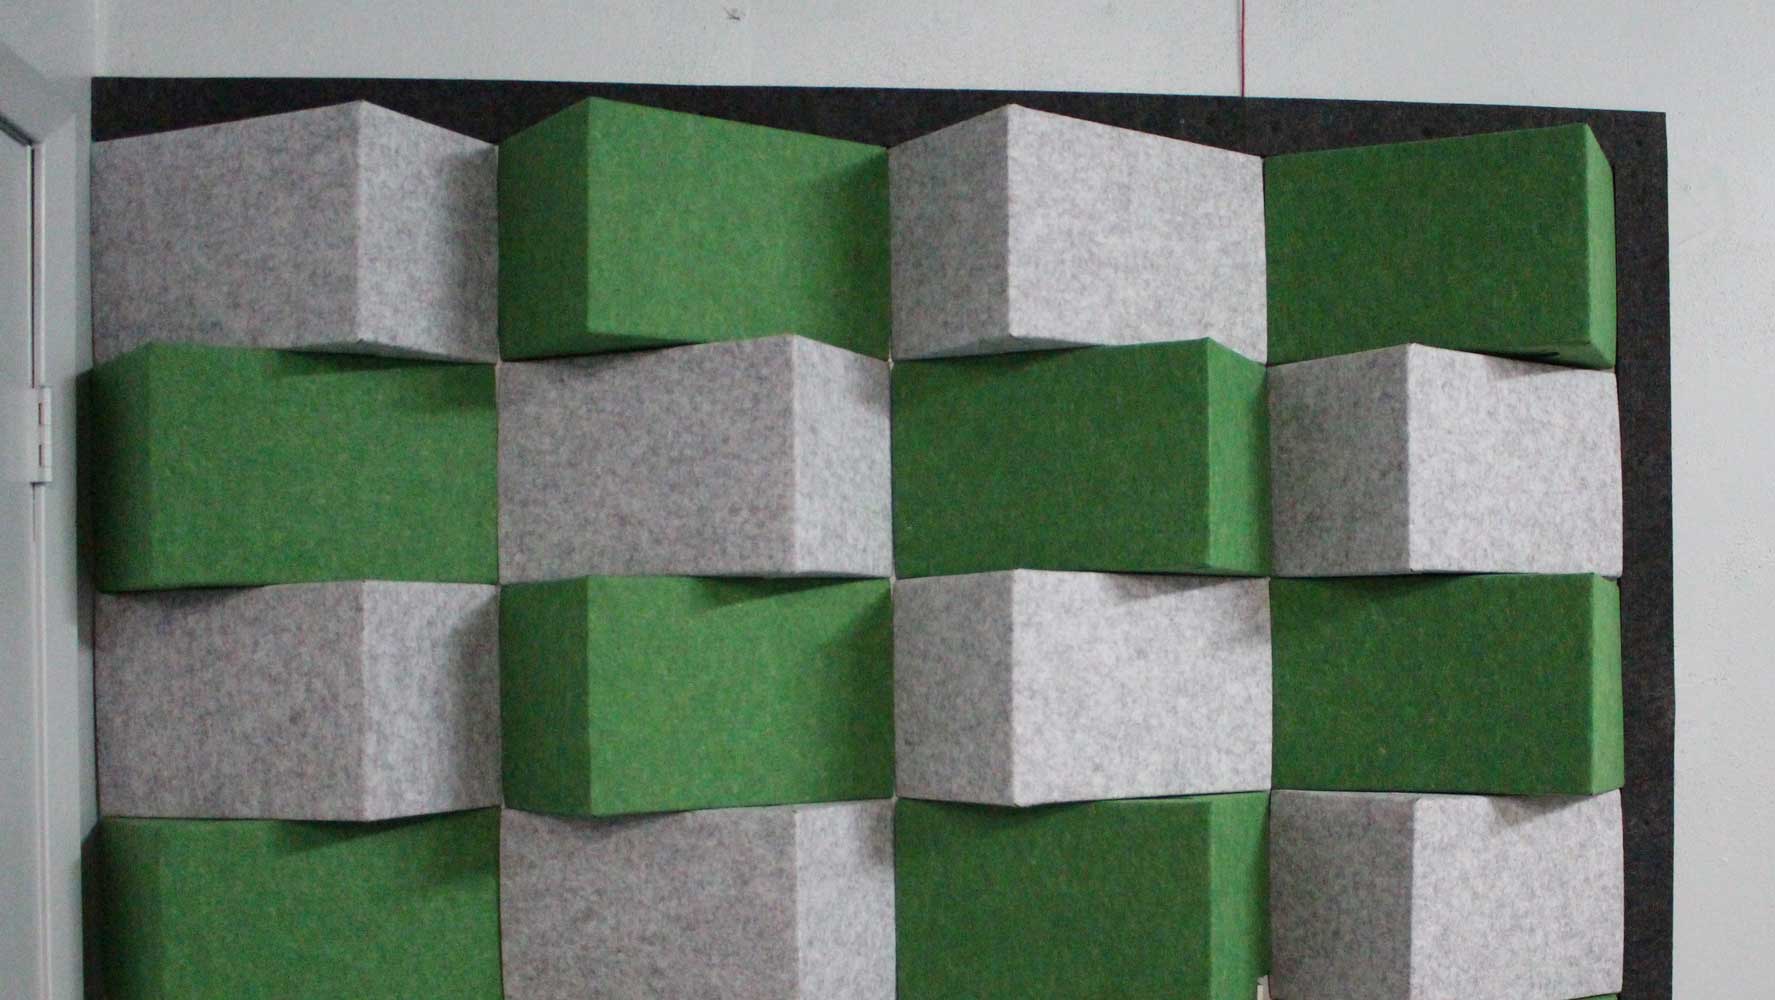 Stille privacy wall made of gray and green Fella Acoustical Felt